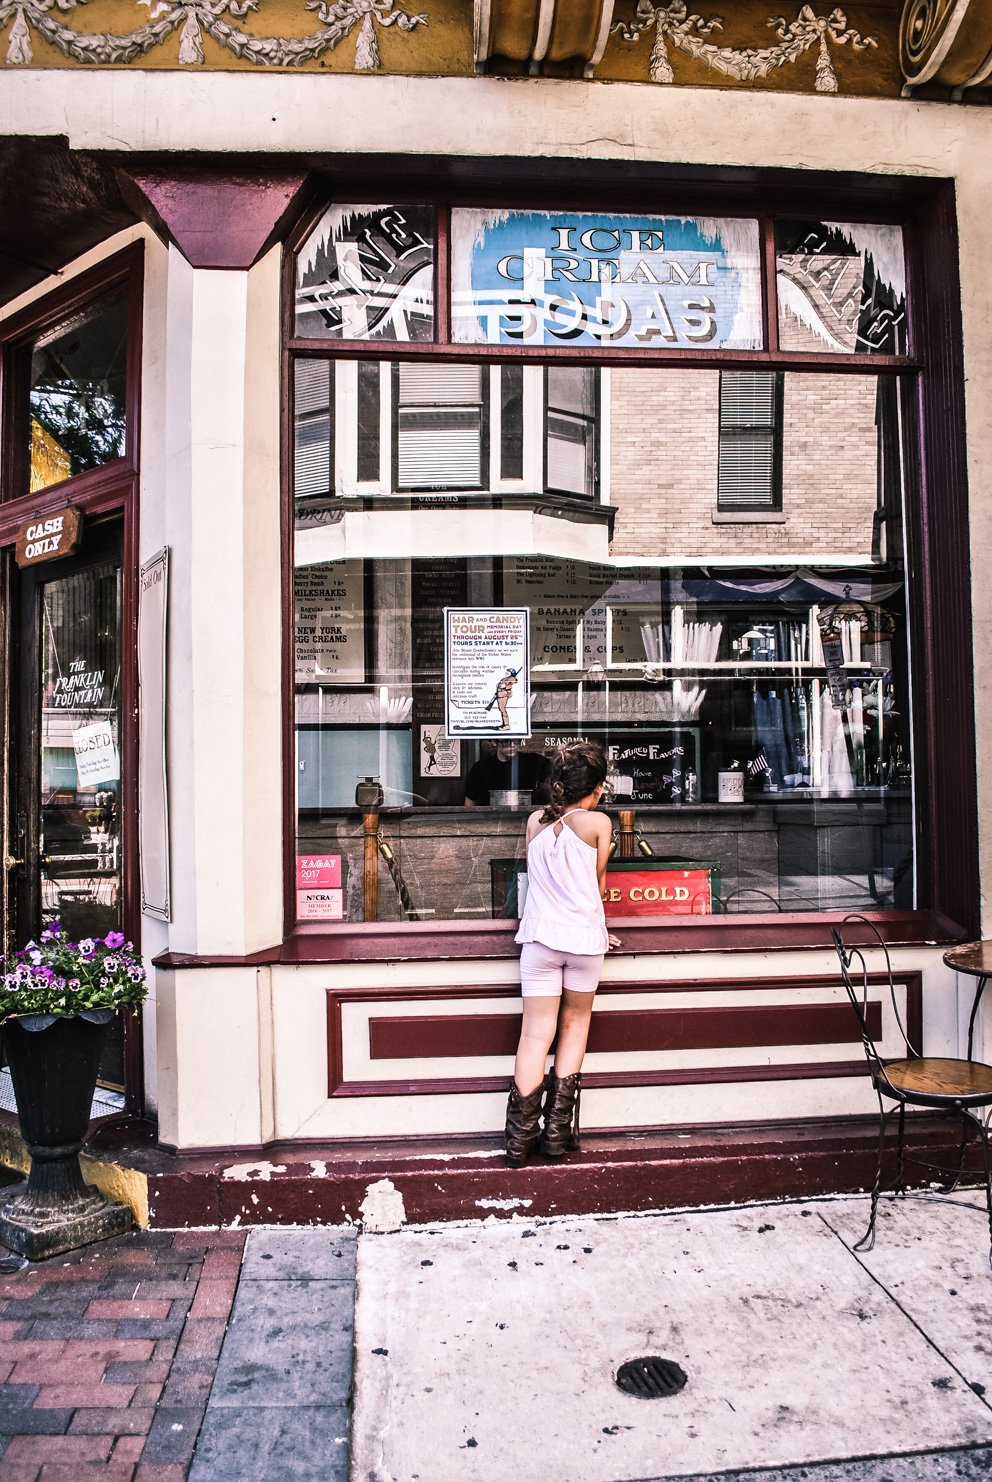 Lifestyle Blogger Jenny Meassick of Chocolate and Lace shares her Ice Cream Guide for visiting the Historic District in Philadelphia.